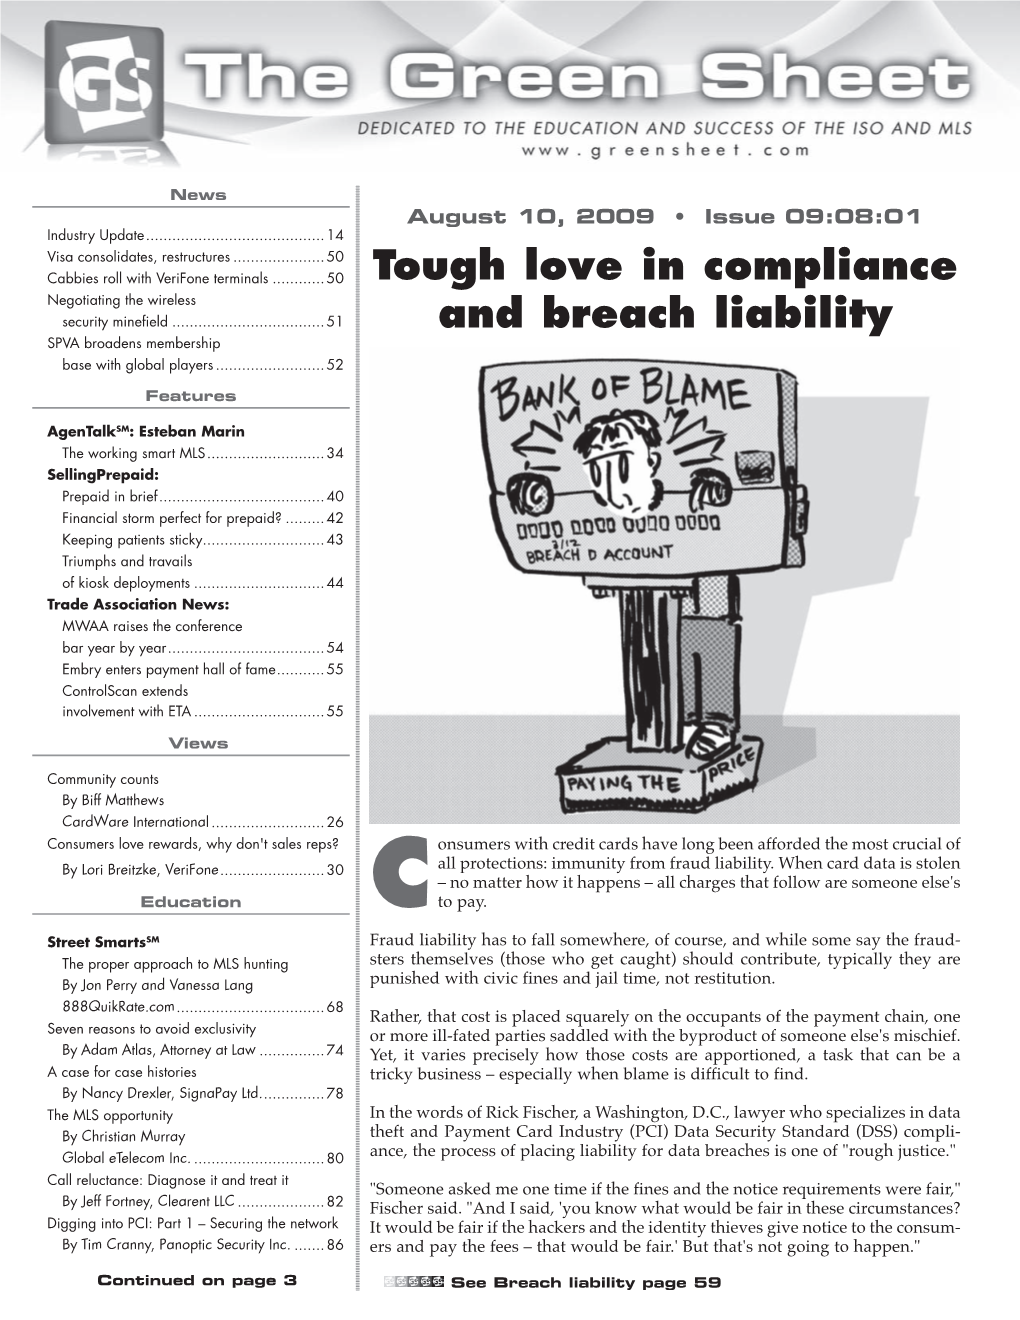 Tough Love in Compliance and Breach Liability